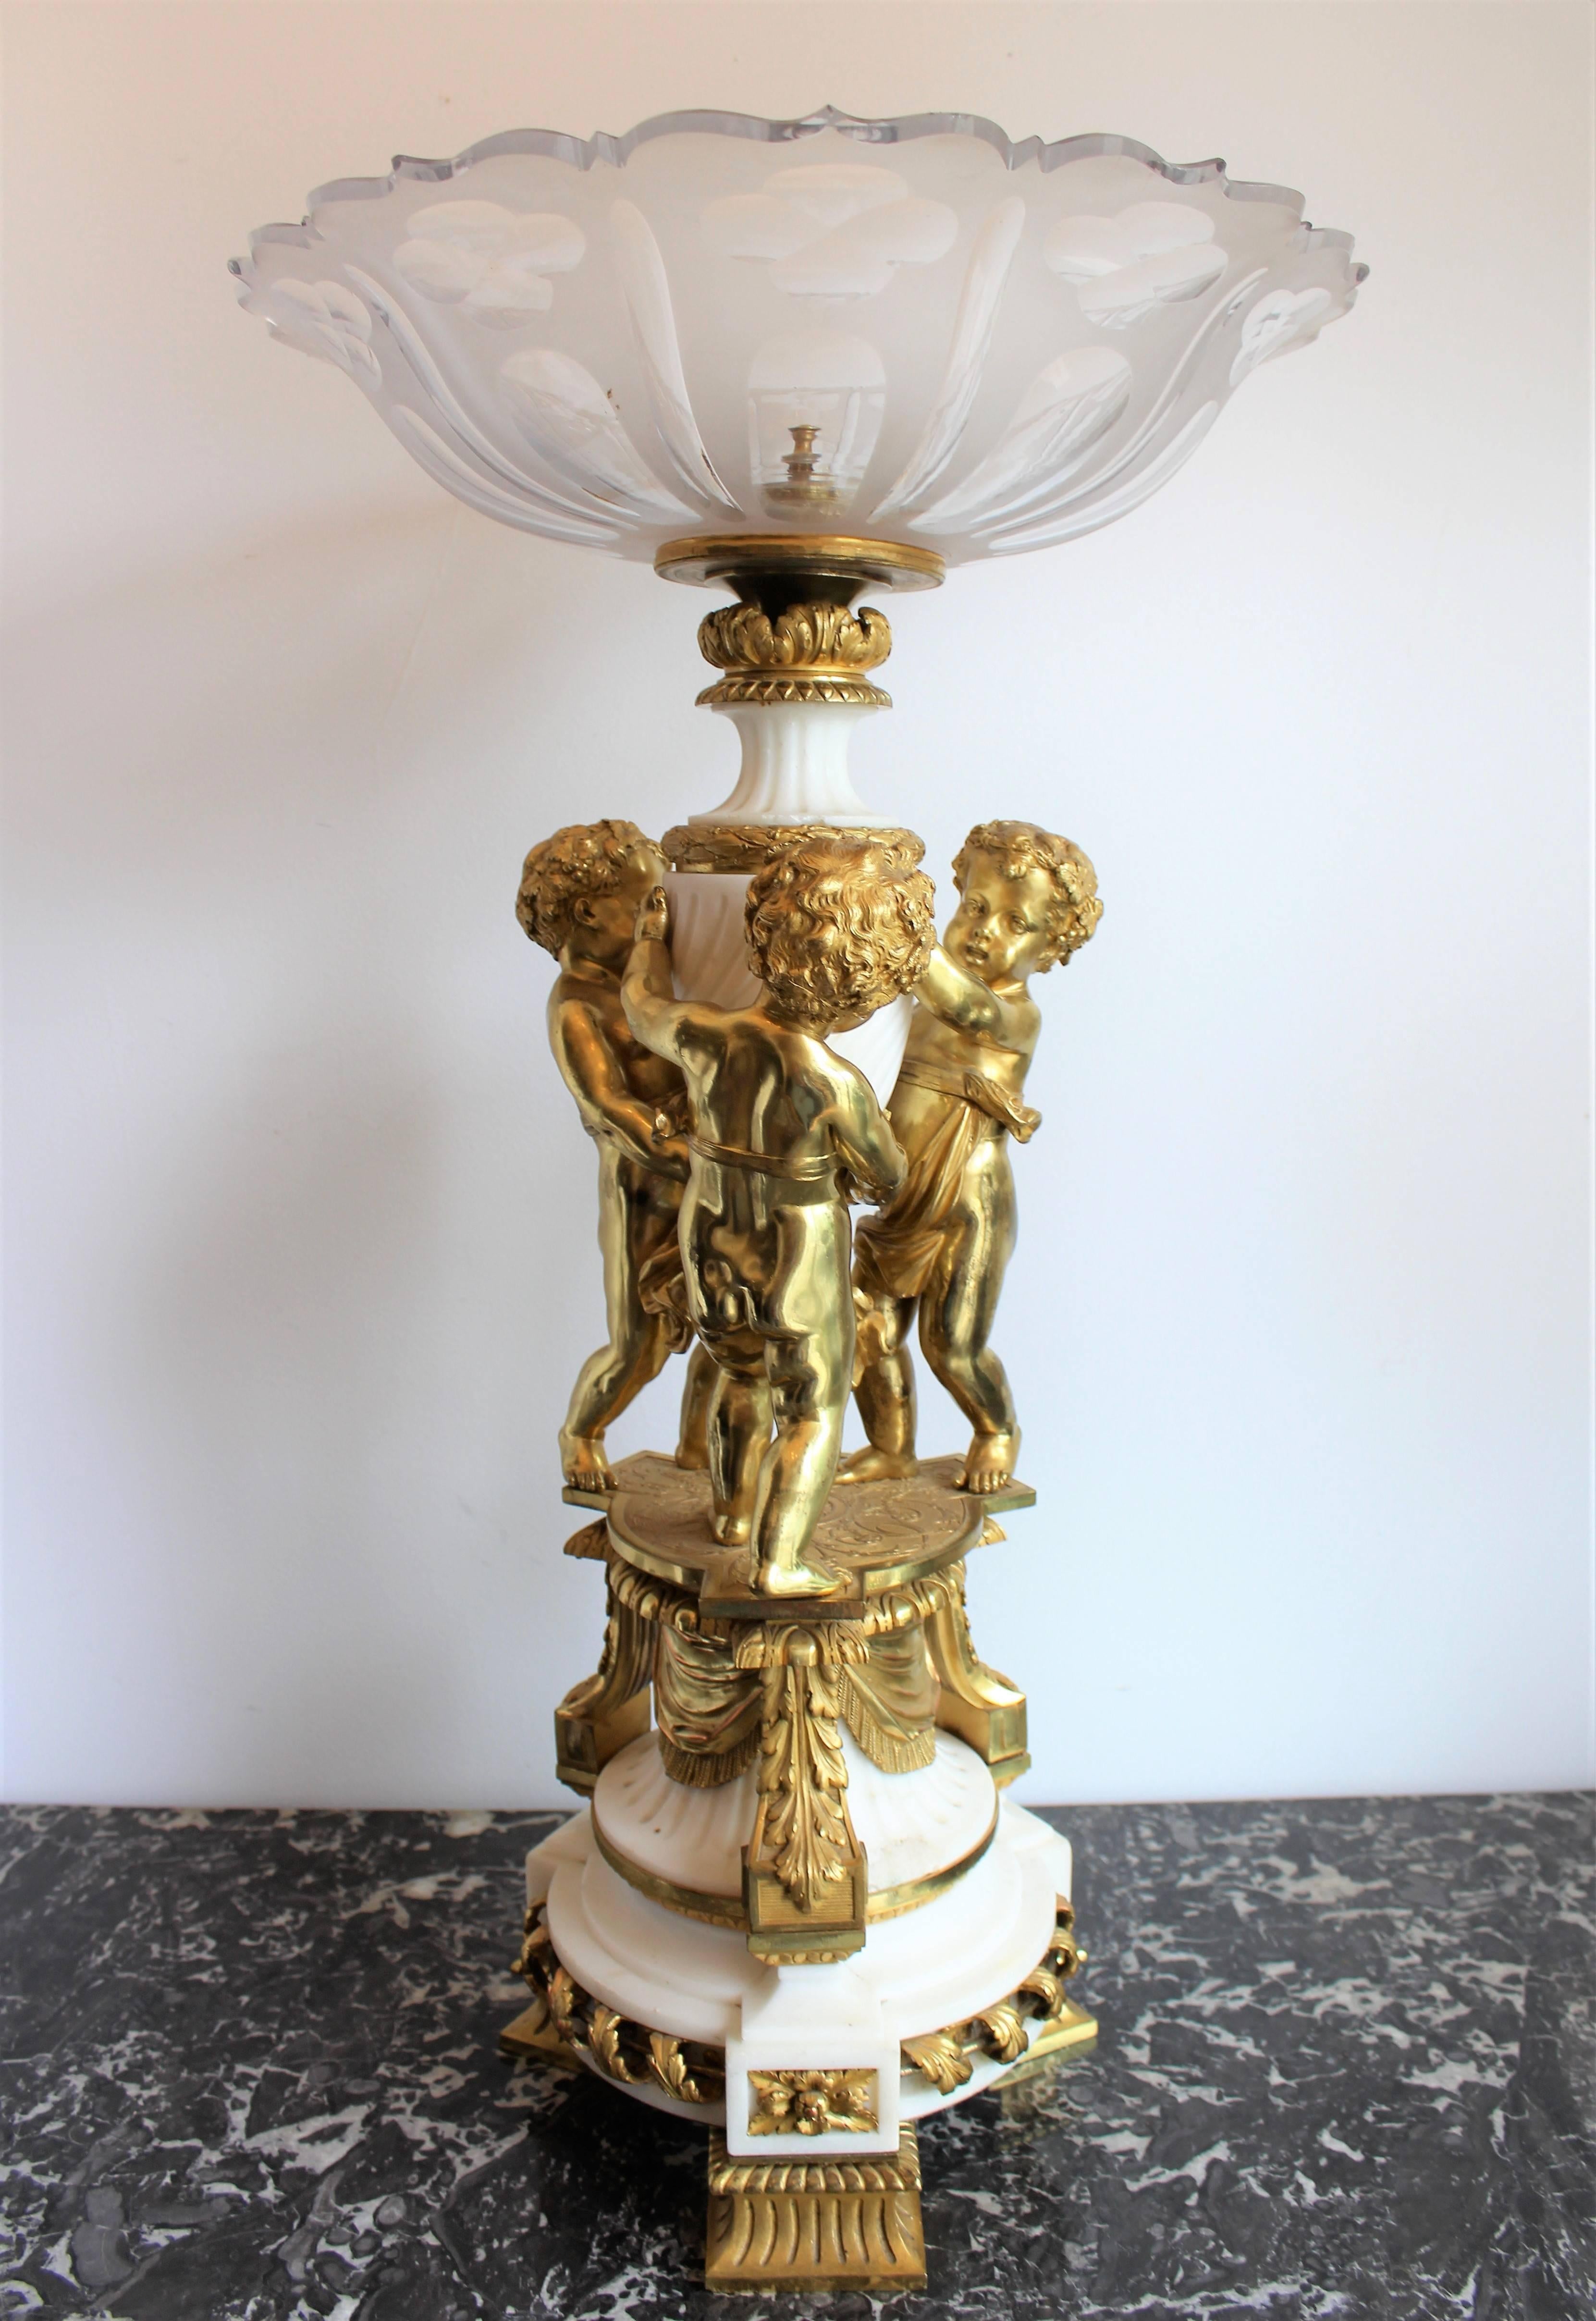 19th century French Louis XVI style gilt bronze, marble and crystal centerpiece. The heavy etched crystal dish held aloft by three putti holding up a marble column over a highly stylized base.